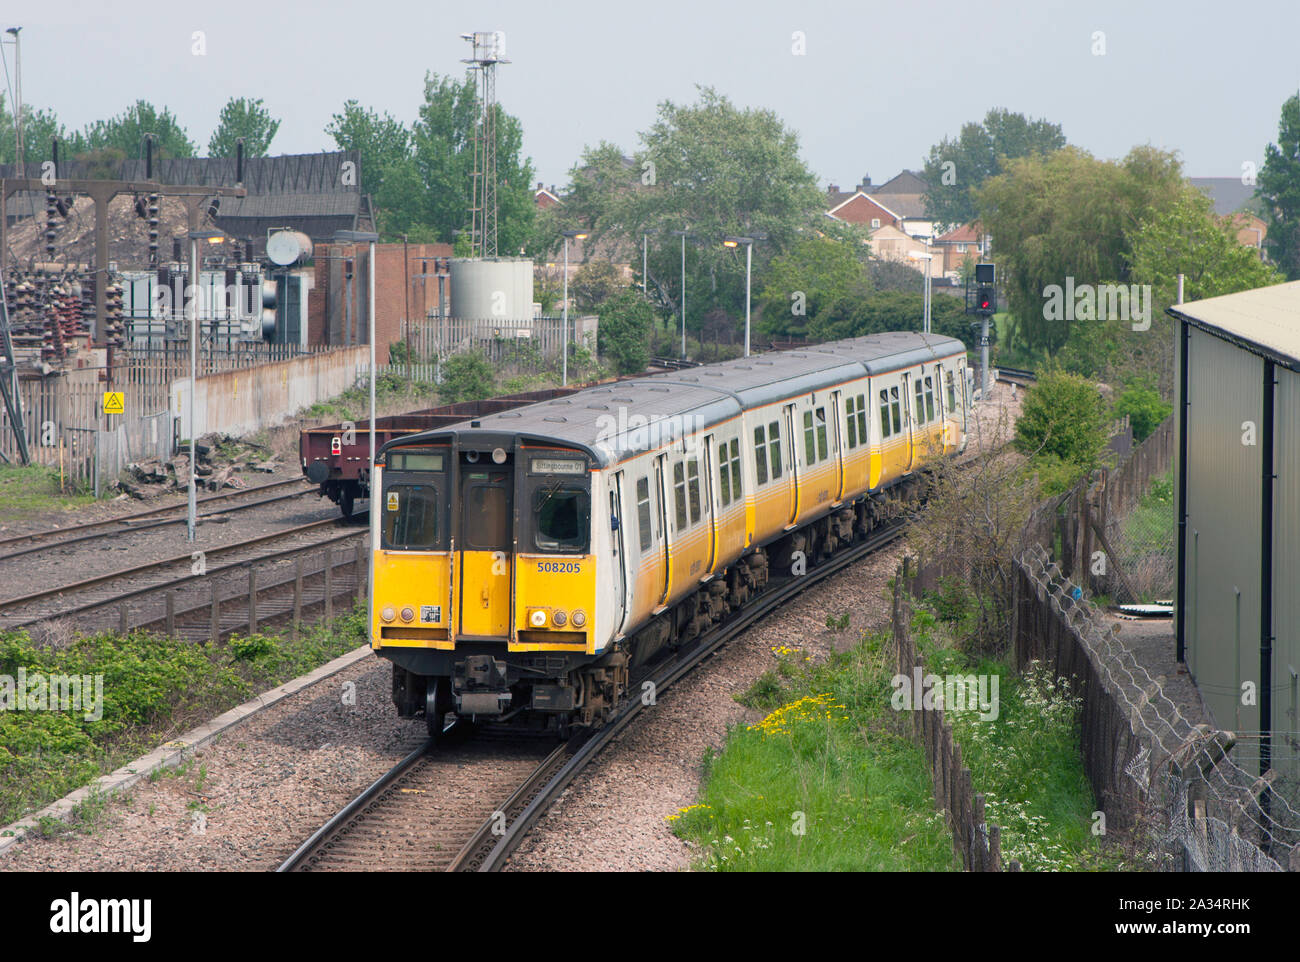 A class 508 electric multiple unit number 508205 departs from Sheerness with a Connex South eastern service on the 9th May 2006. Stock Photo